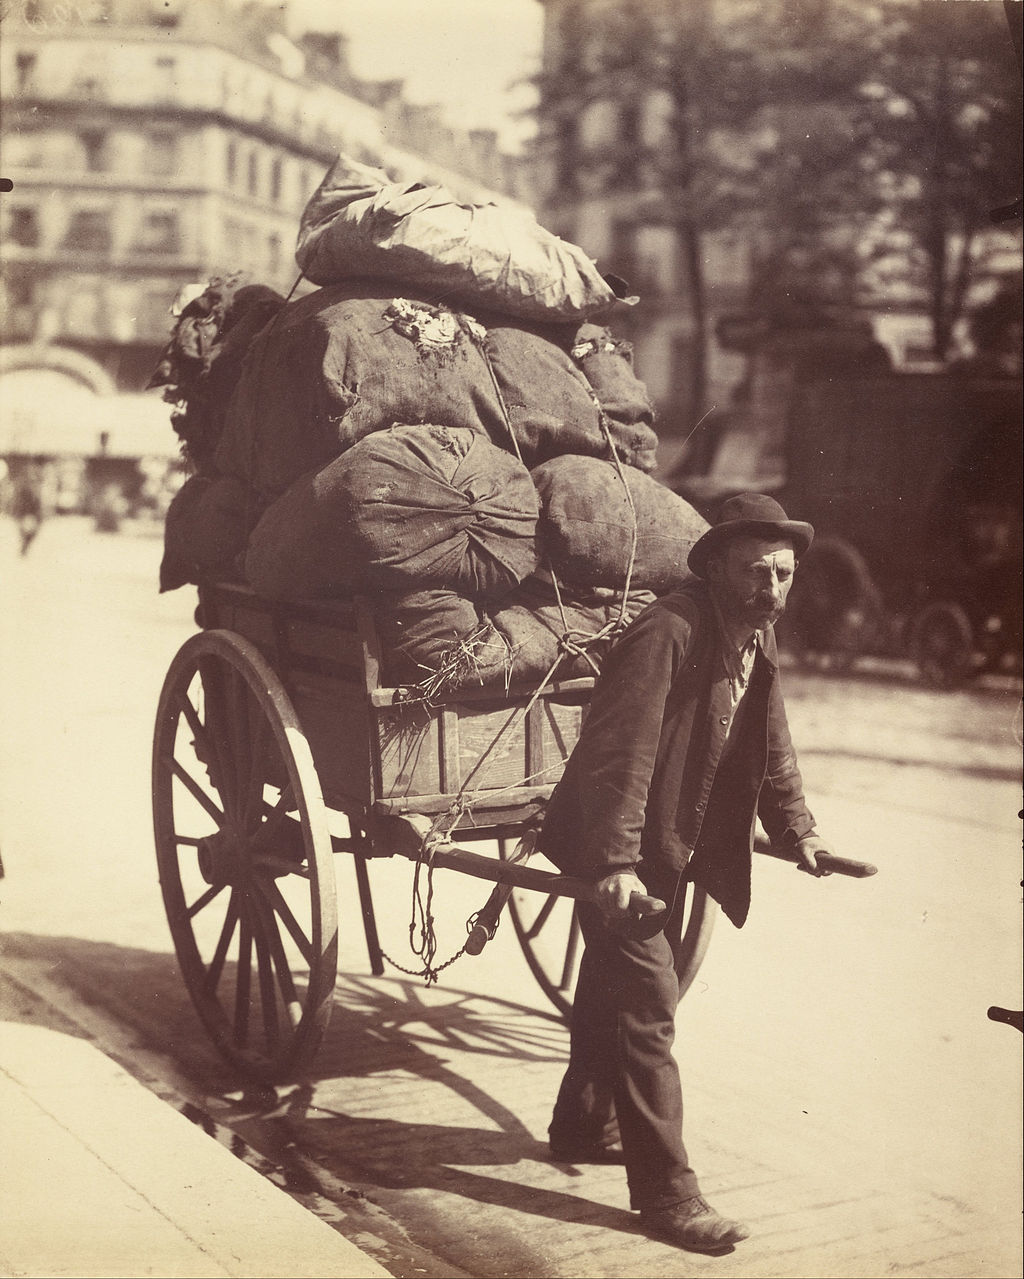 Man on a Paris street pulling a two-wheeled handcart loaded with sacks of old rags